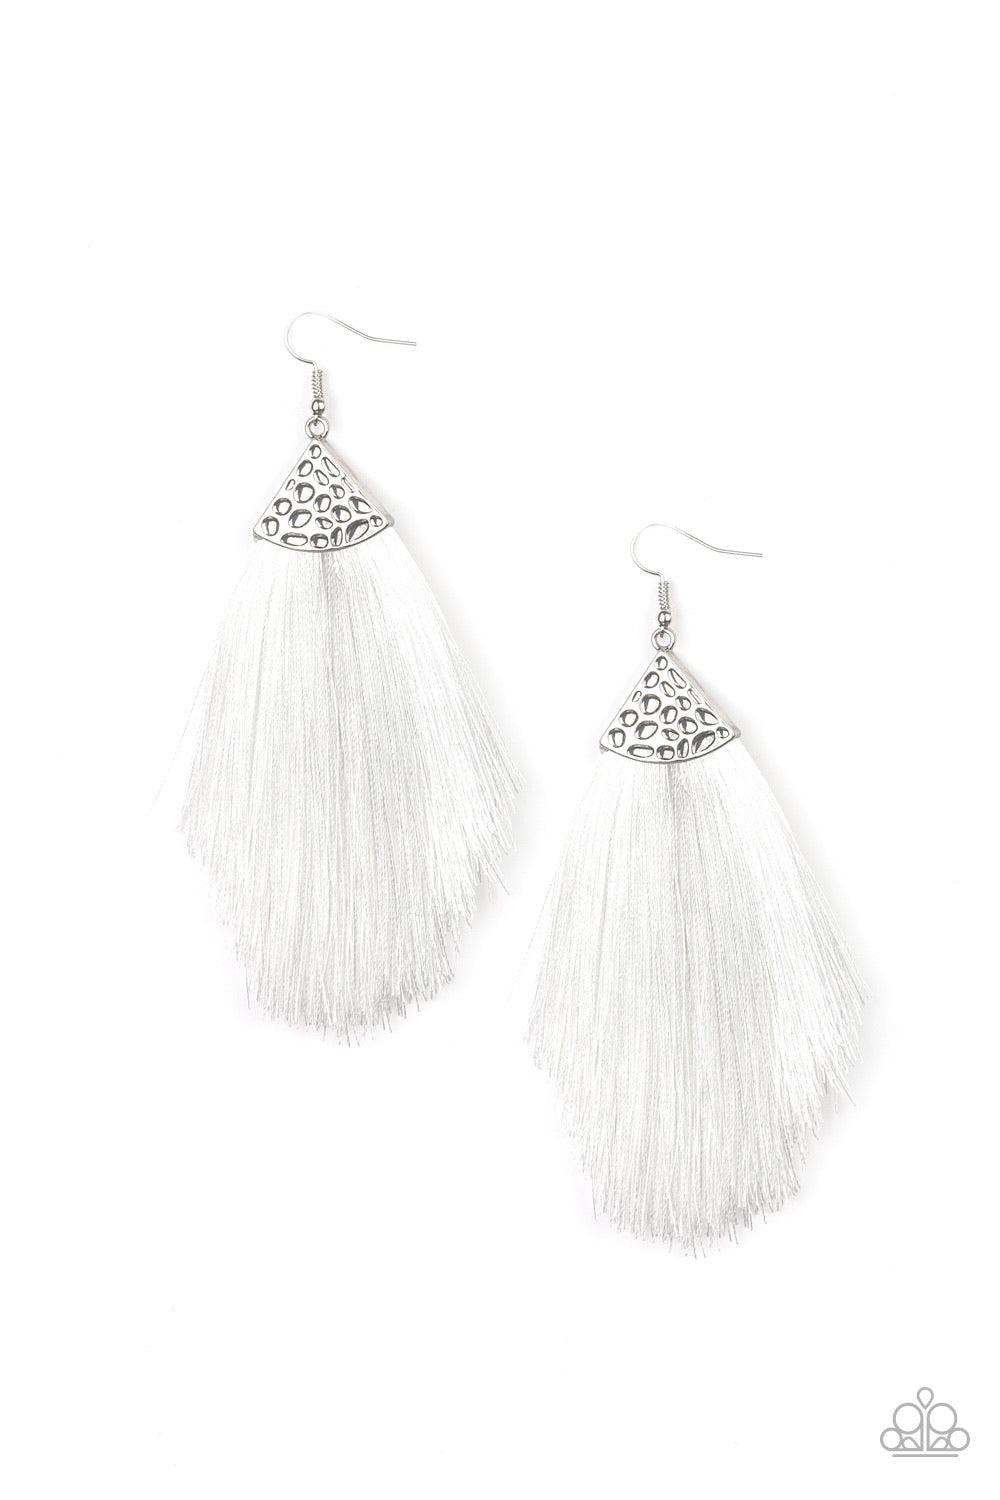 Paparazzi Accessories Tassel Tempo - White Shiny white thread fans out from the bottom of a hammered silver fitting, creating a tapered fringe. Earring attaches to a standard fishhook fitting. Sold as one pair of earrings. Jewelry